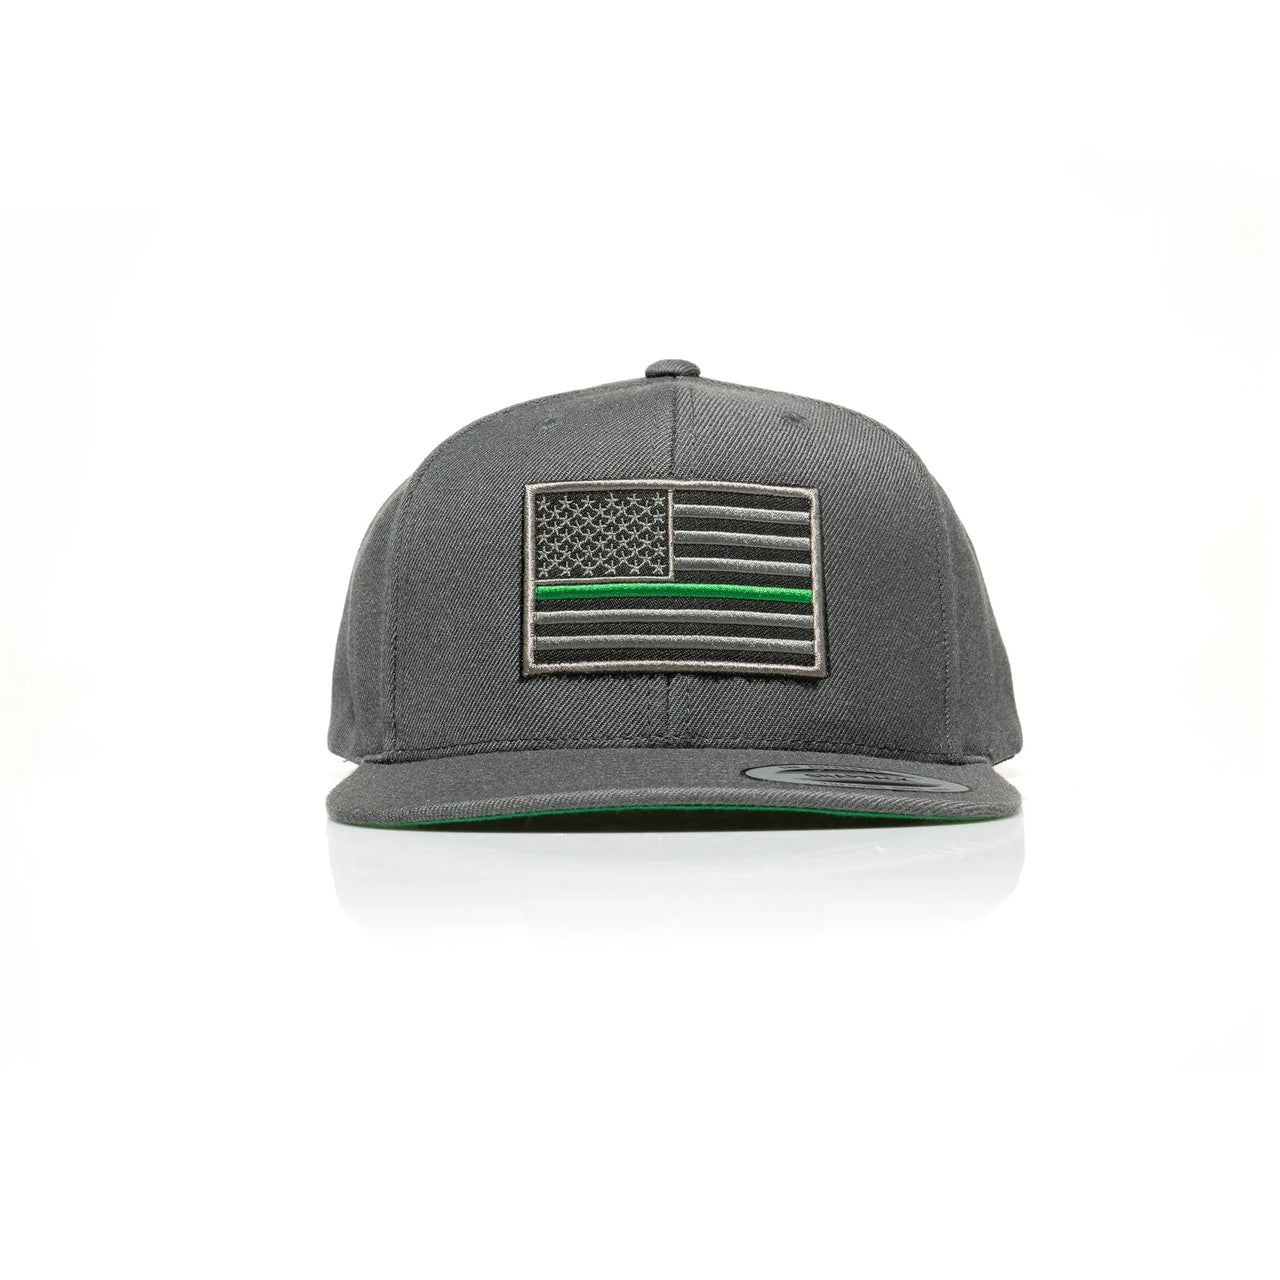 Thin Green Line Patch Snapback